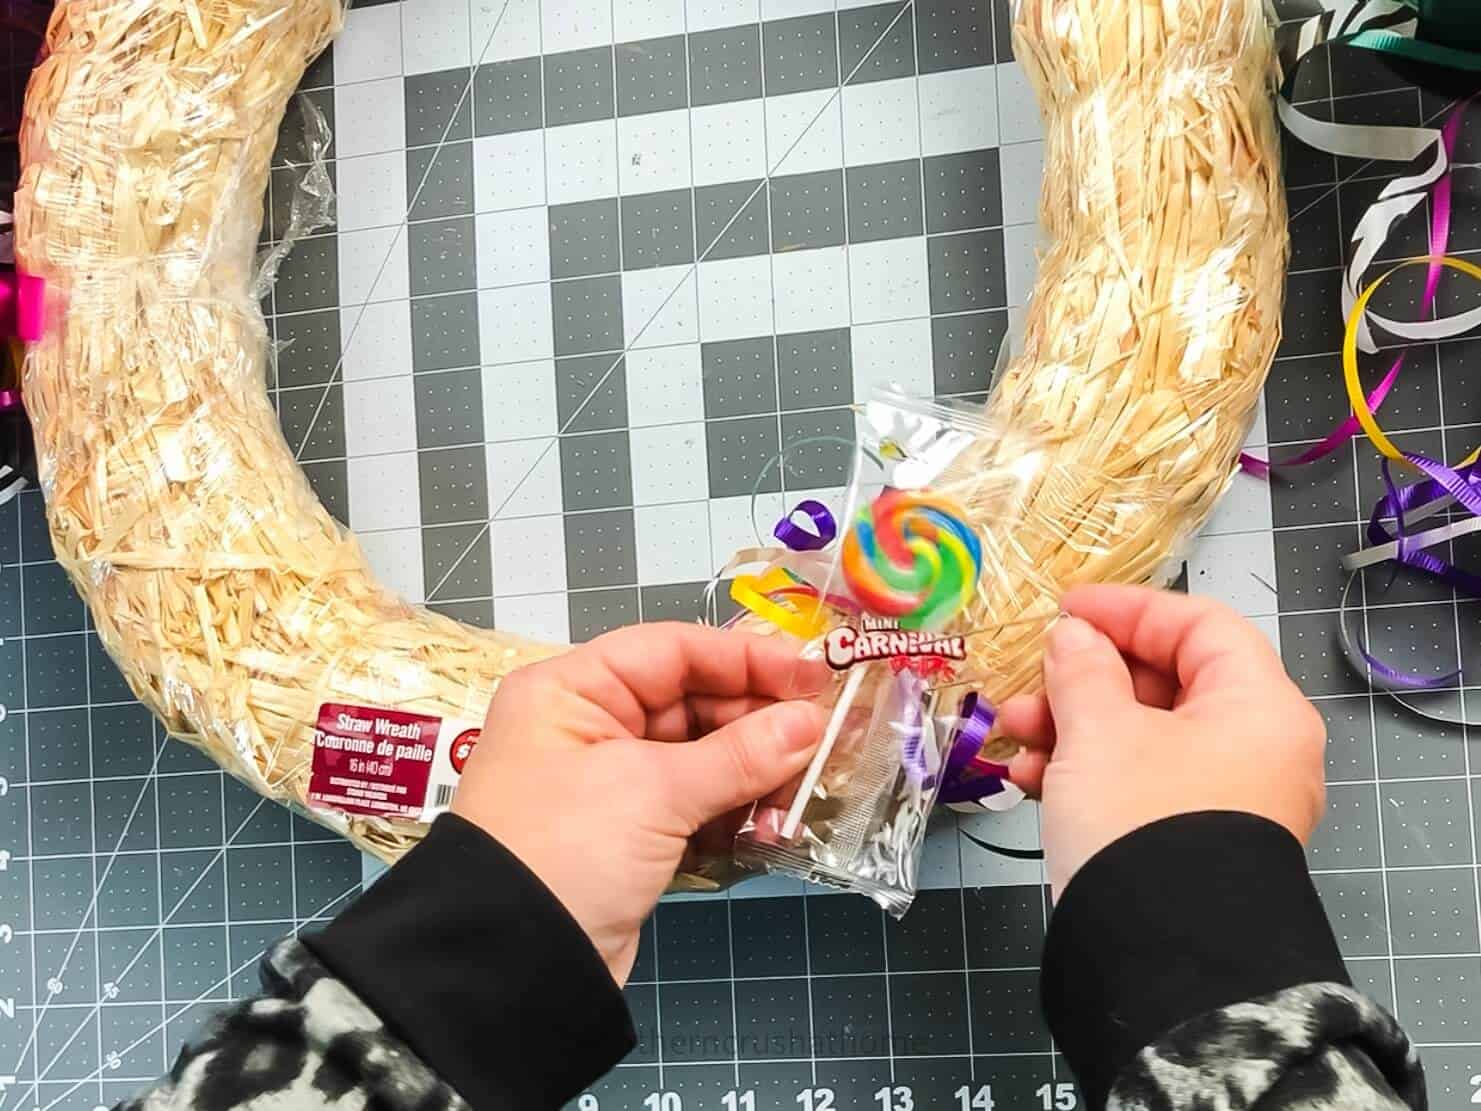 pinning candy on wreath